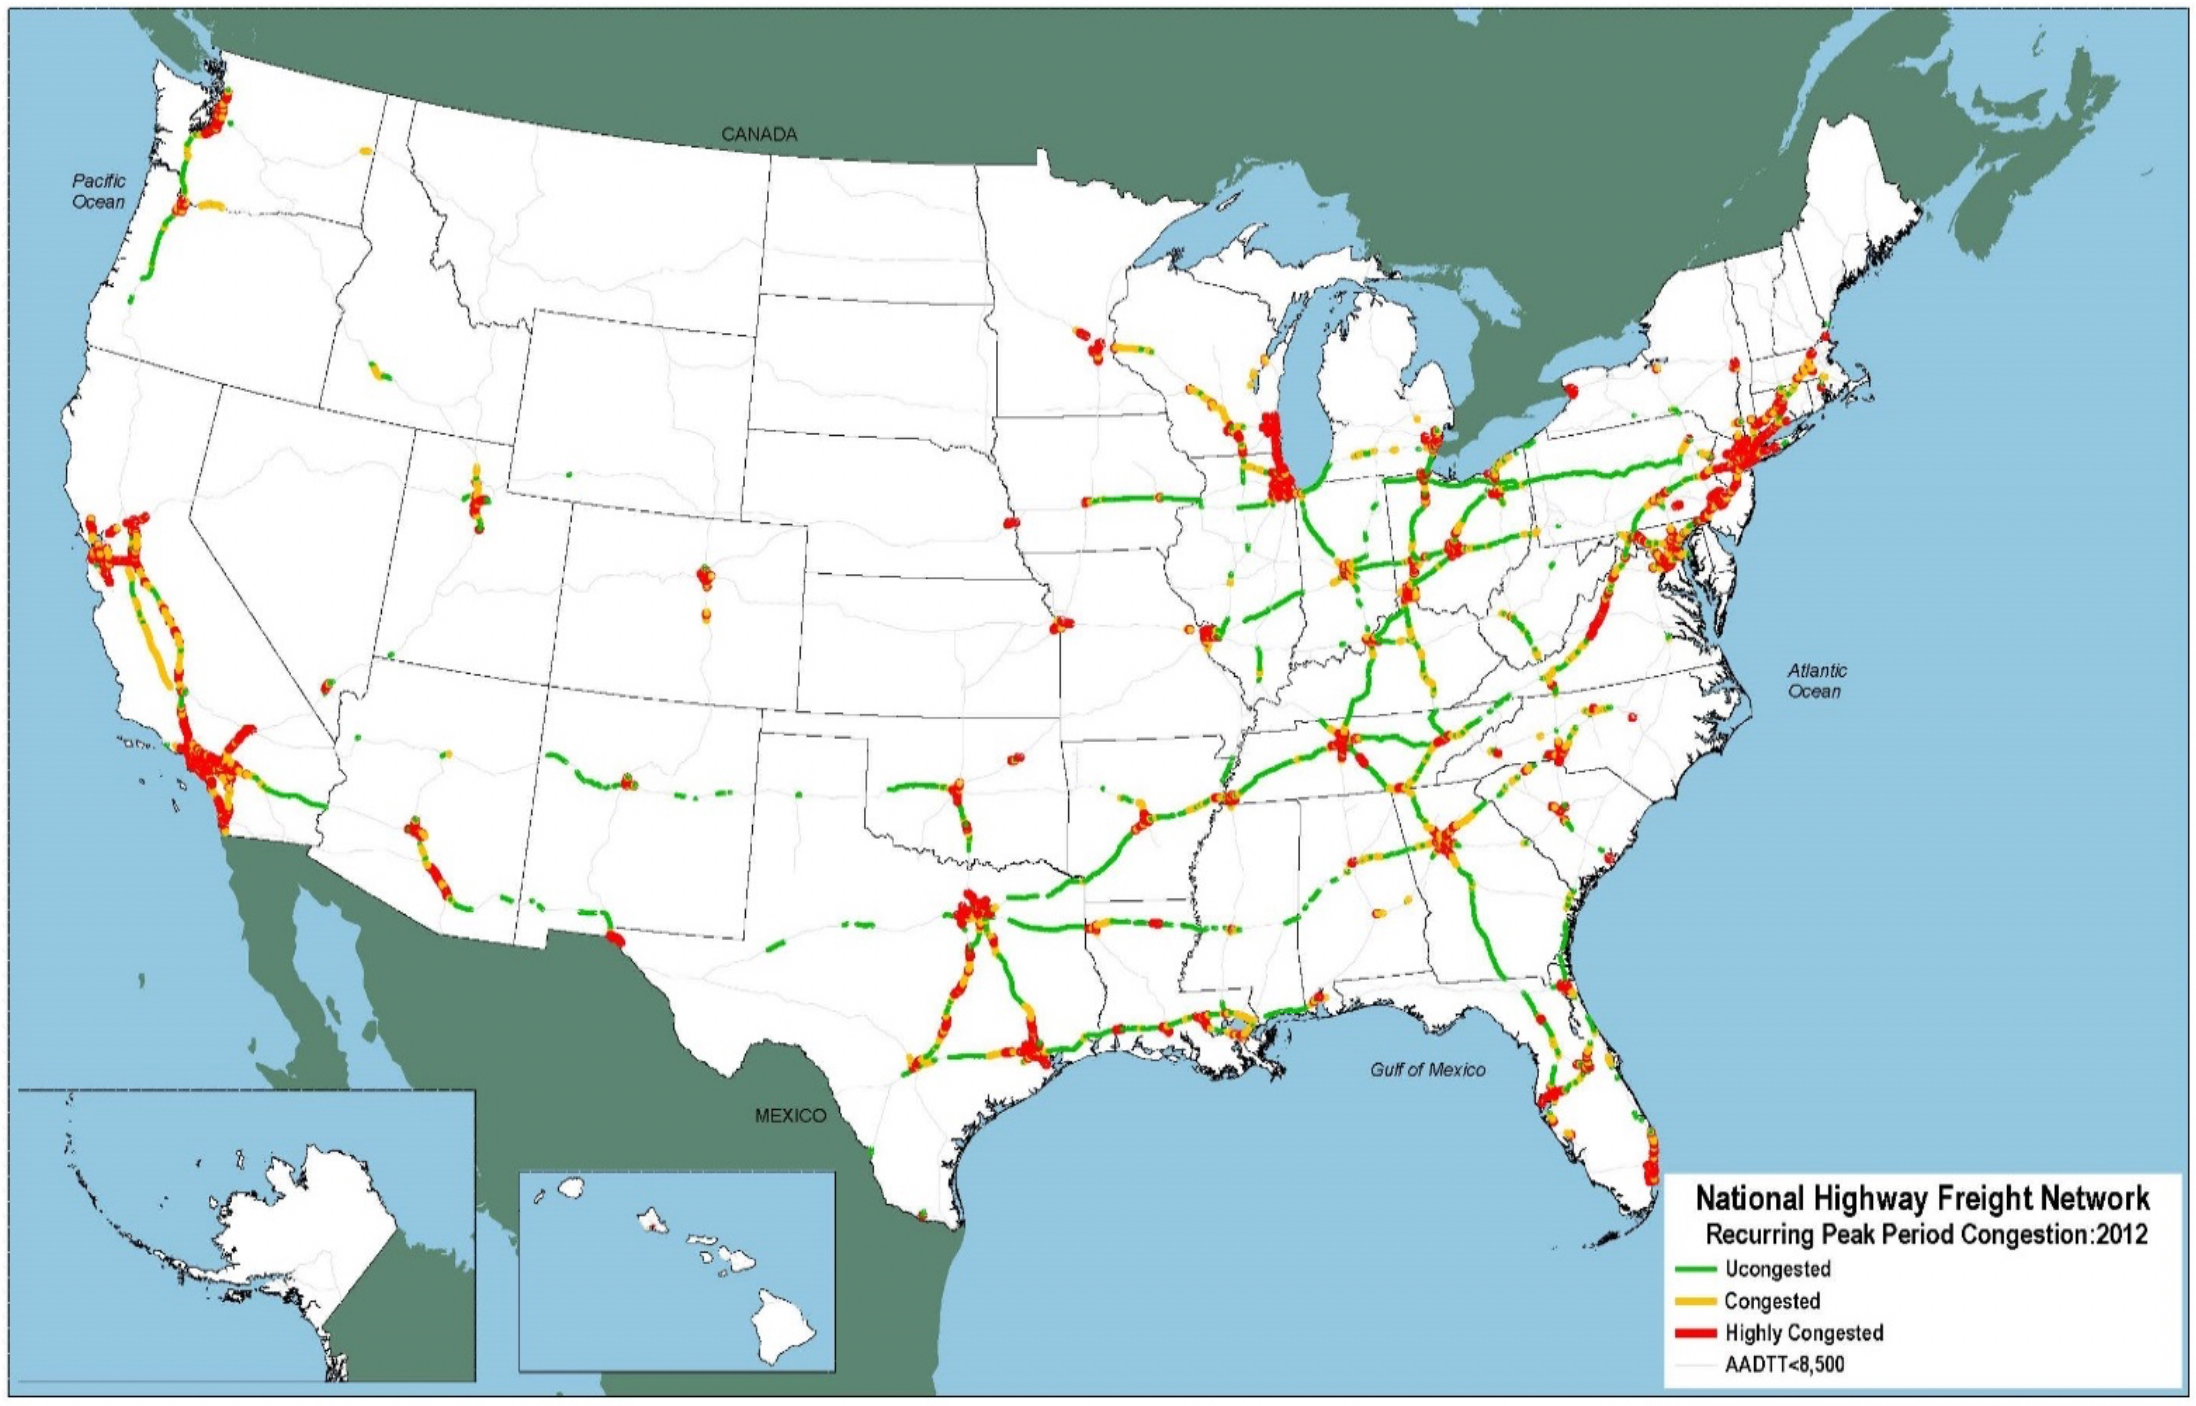 An outline map of the 48 contiguous States and insets for Alaska and Hawaii show areas of recurring peak period congestion solely for high volume truck portions on the NHFN in 2012, organized by uncongested, congested, or highly congested. Recurring peak period congestion occurs mostly in the Northeast region of the United States. Highly congested areas are primarily located in States such as New Jersey, New York, Connecticut, California, Texas, and Illinois.